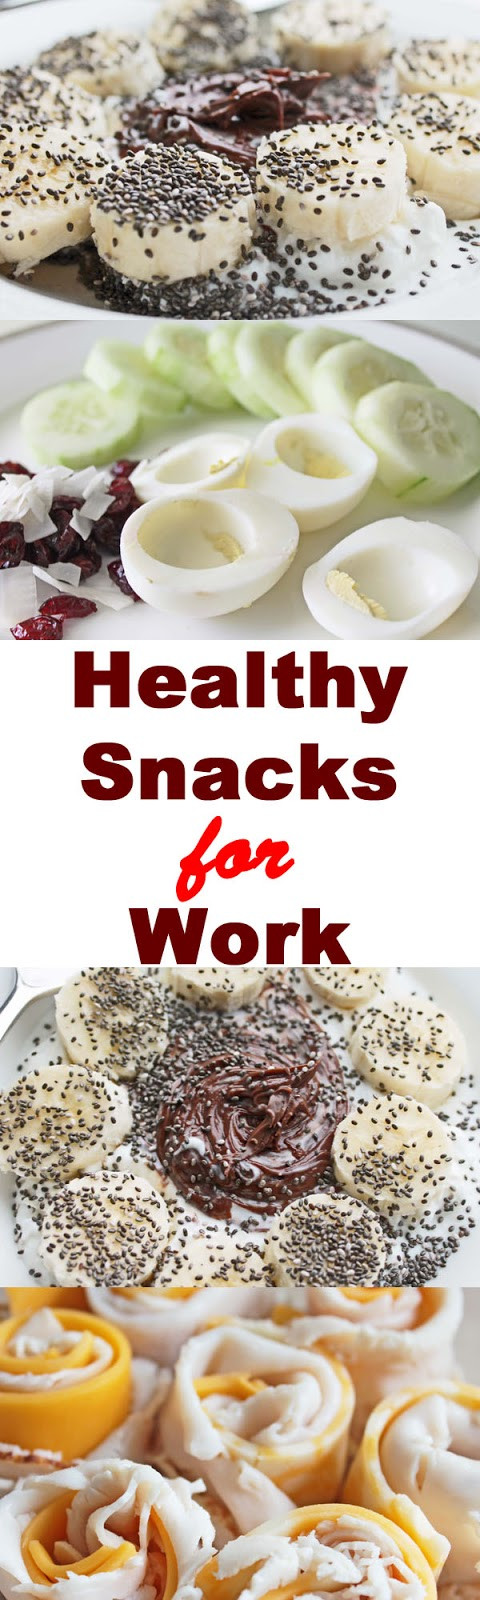 Easy Healthy Snacks For Work
 Healthy Snacks for Work Daily Re mendations 13